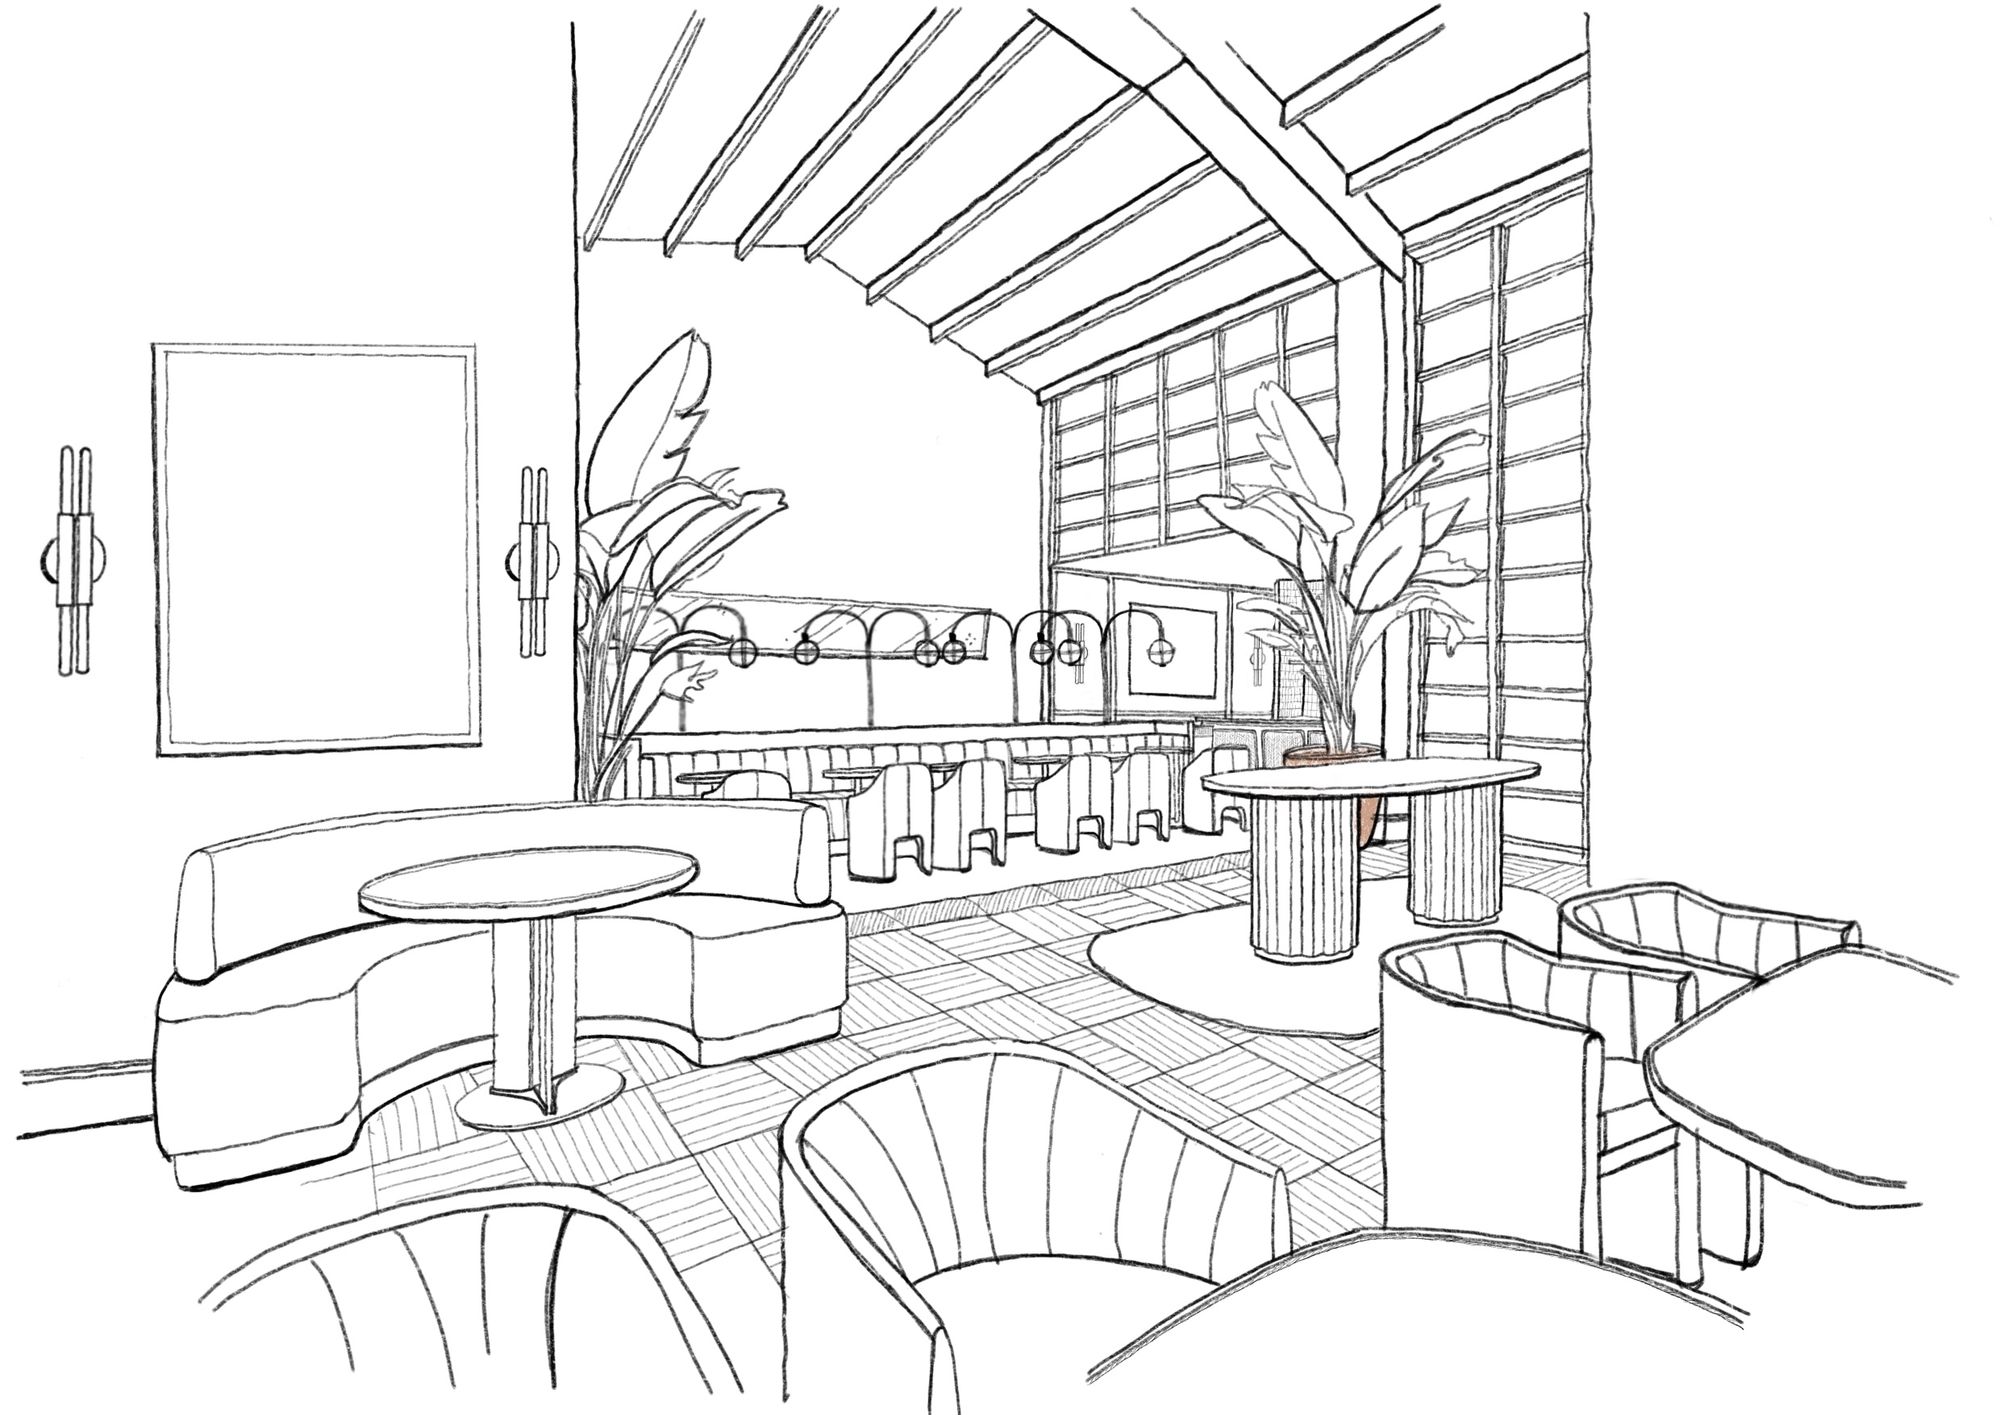 Sketches during the ideation phase of a restaurant at Boat Quay by Shan Wong